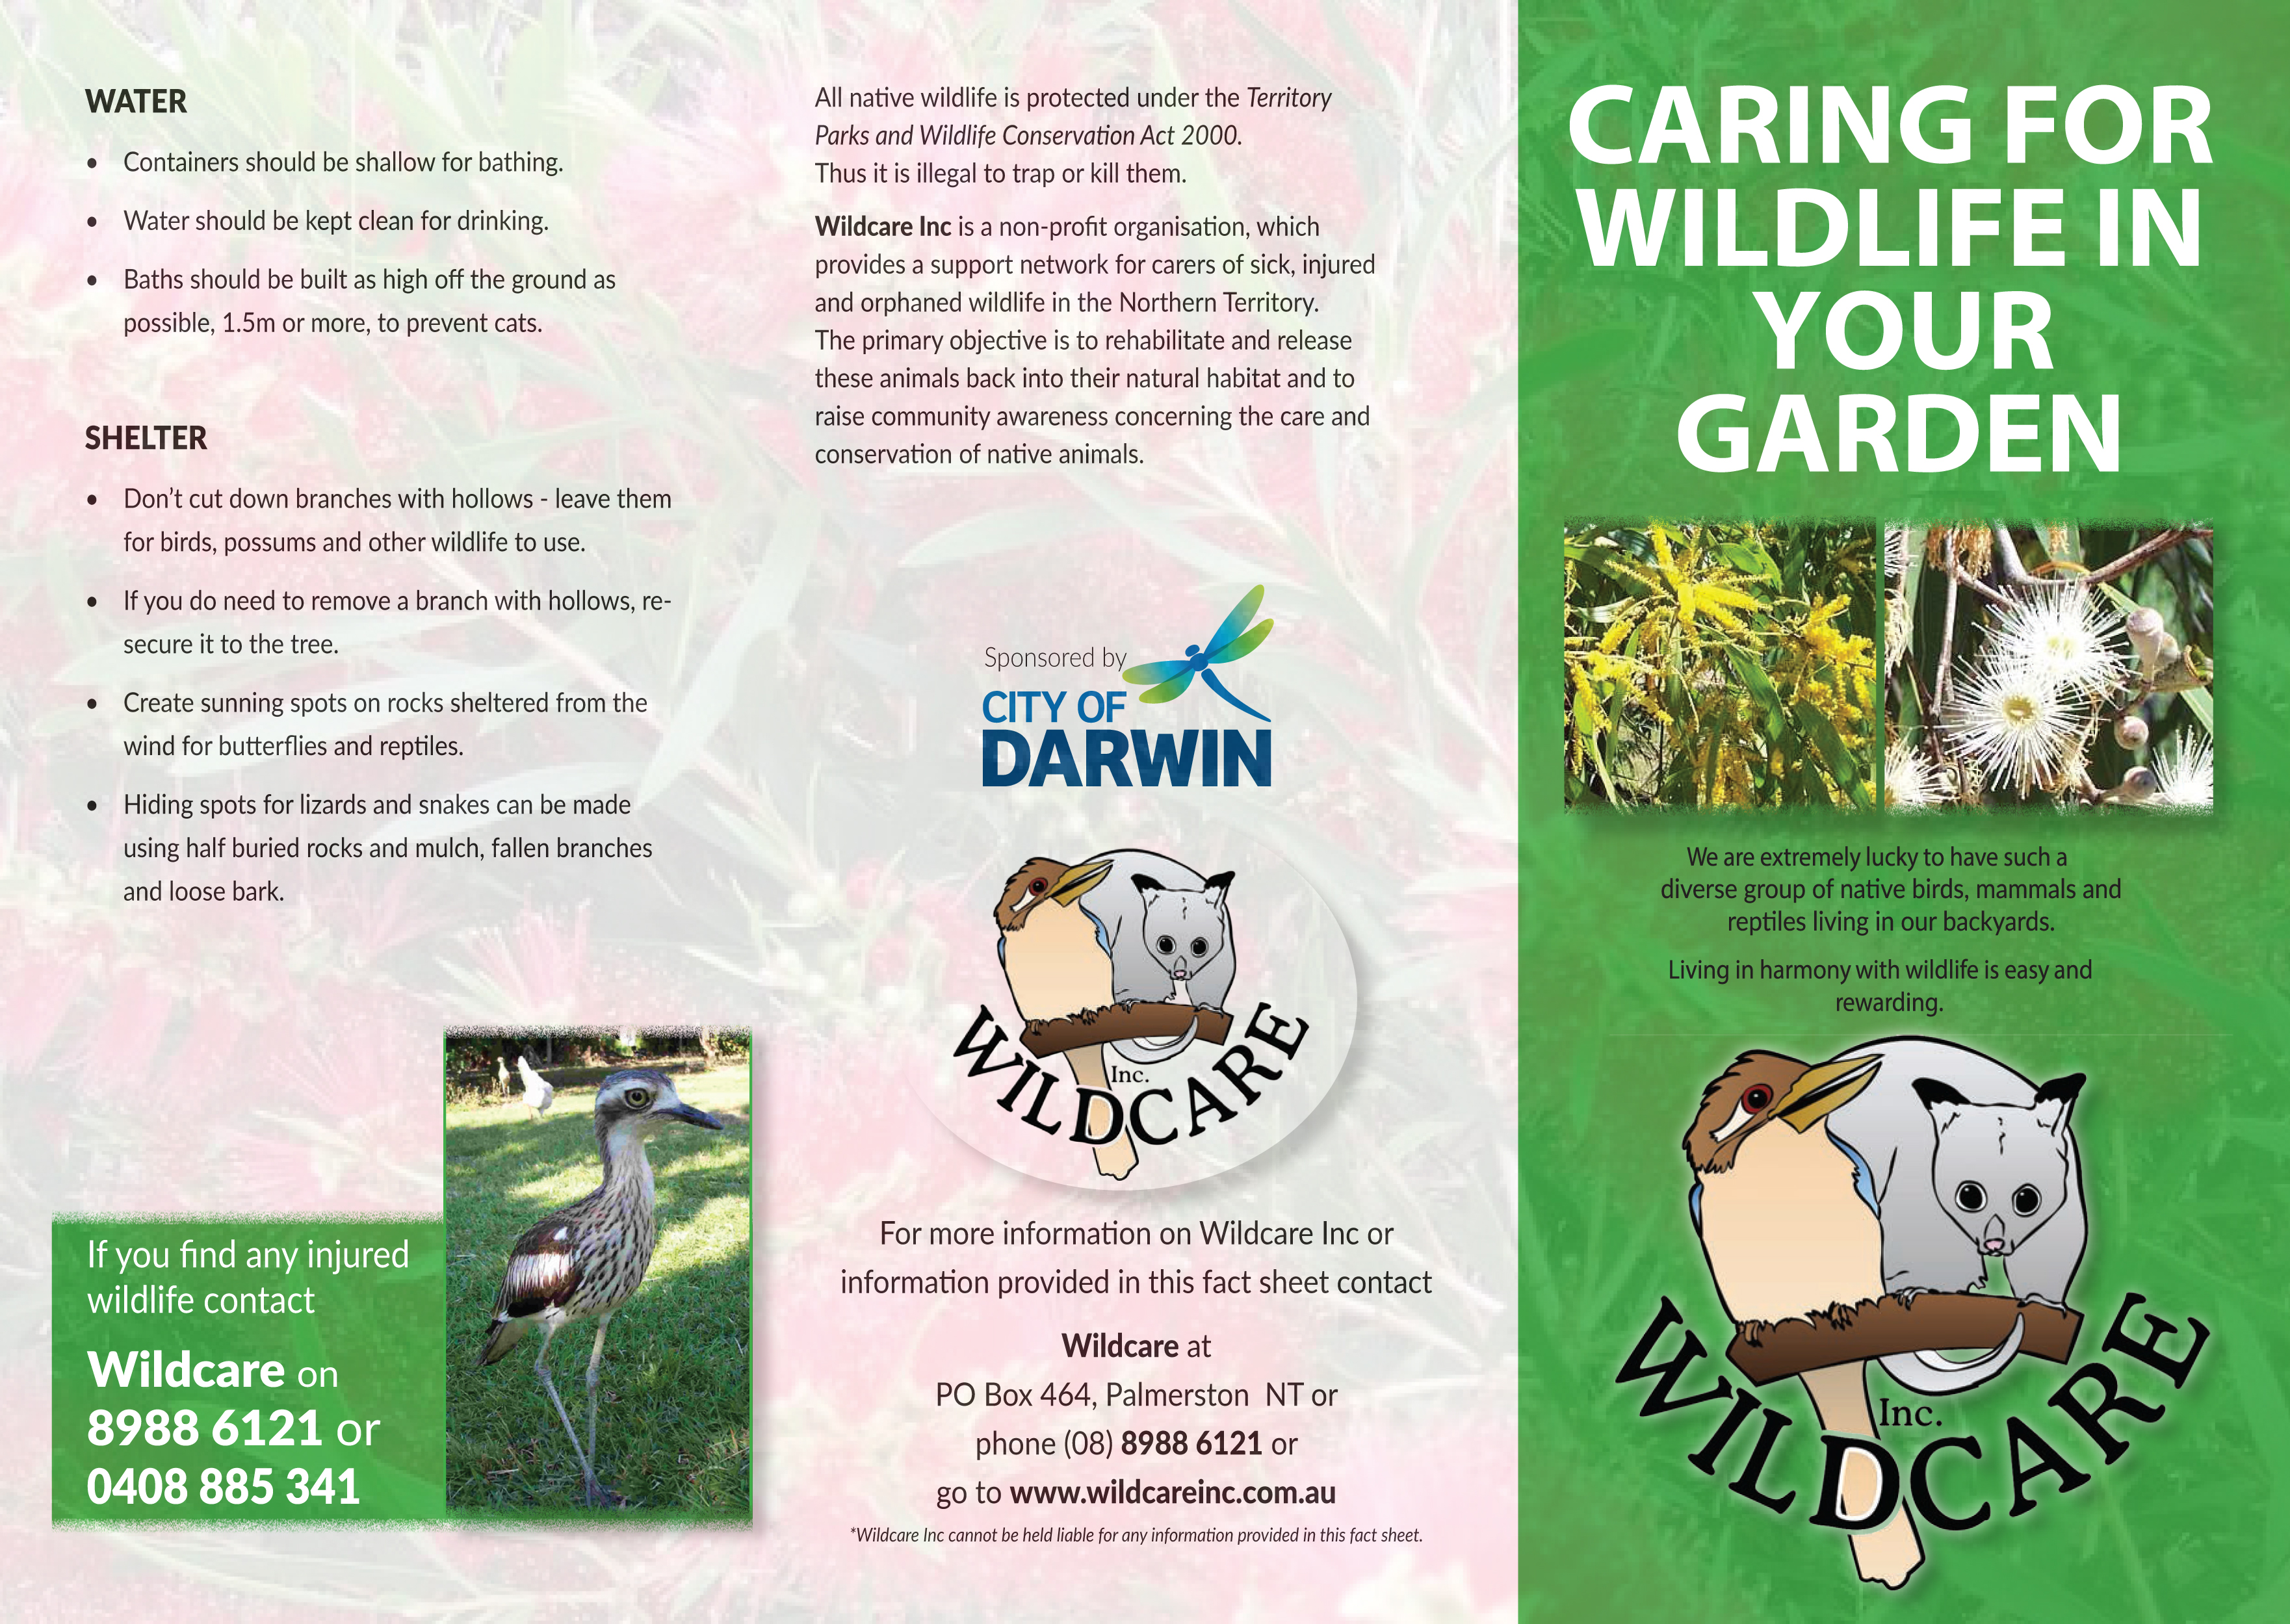 Caring for wildlife in the garden part1